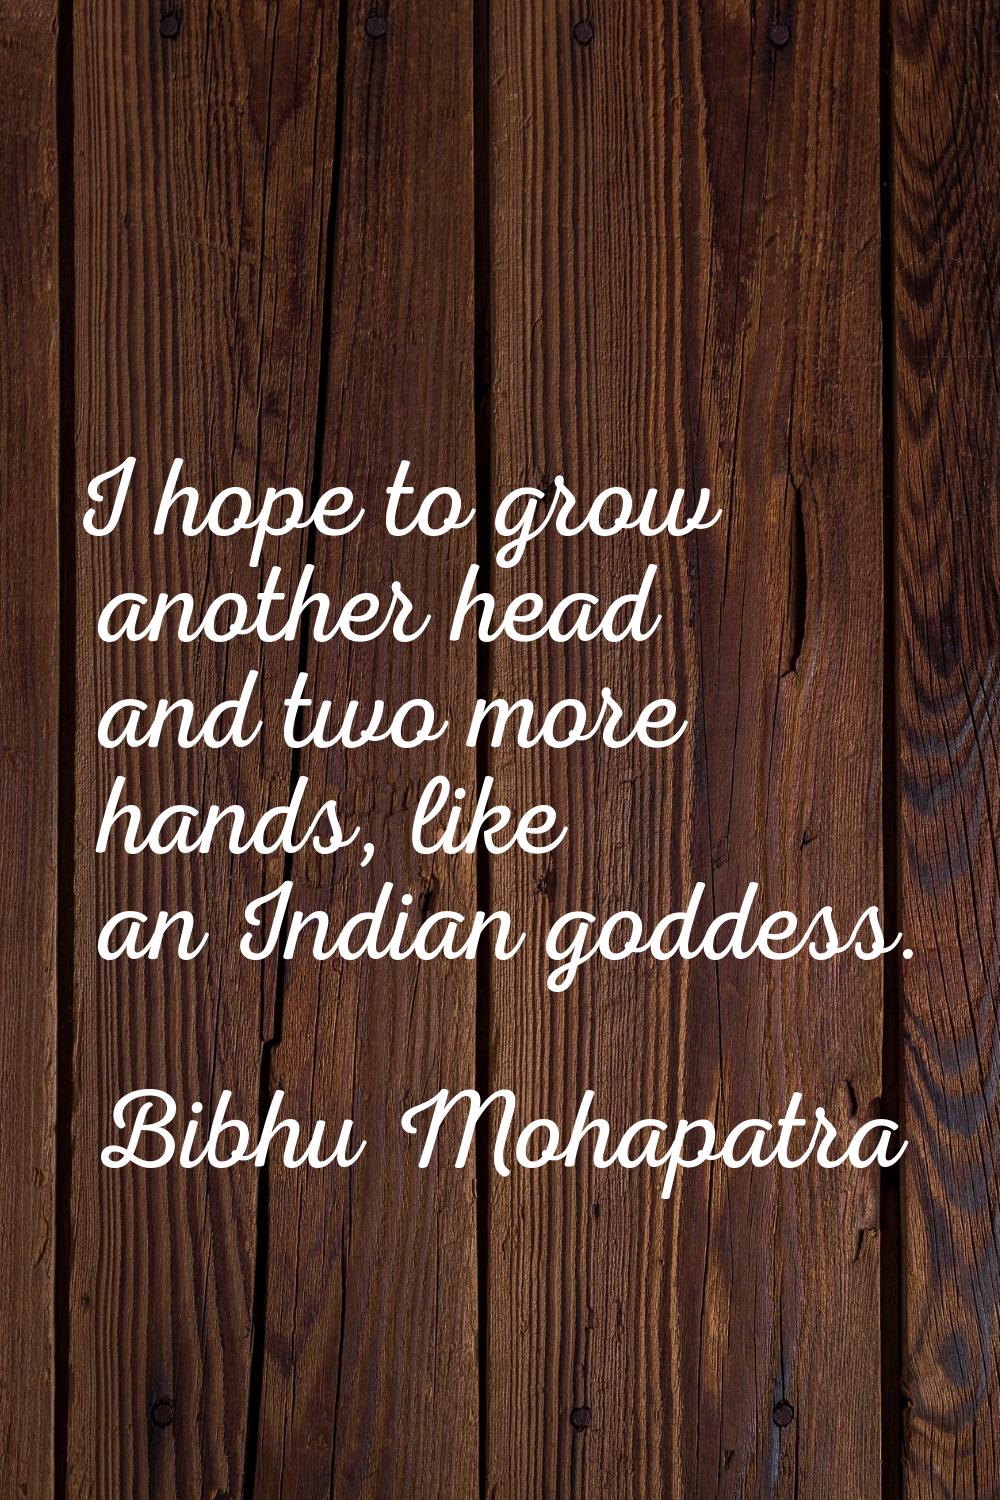 I hope to grow another head and two more hands, like an Indian goddess.